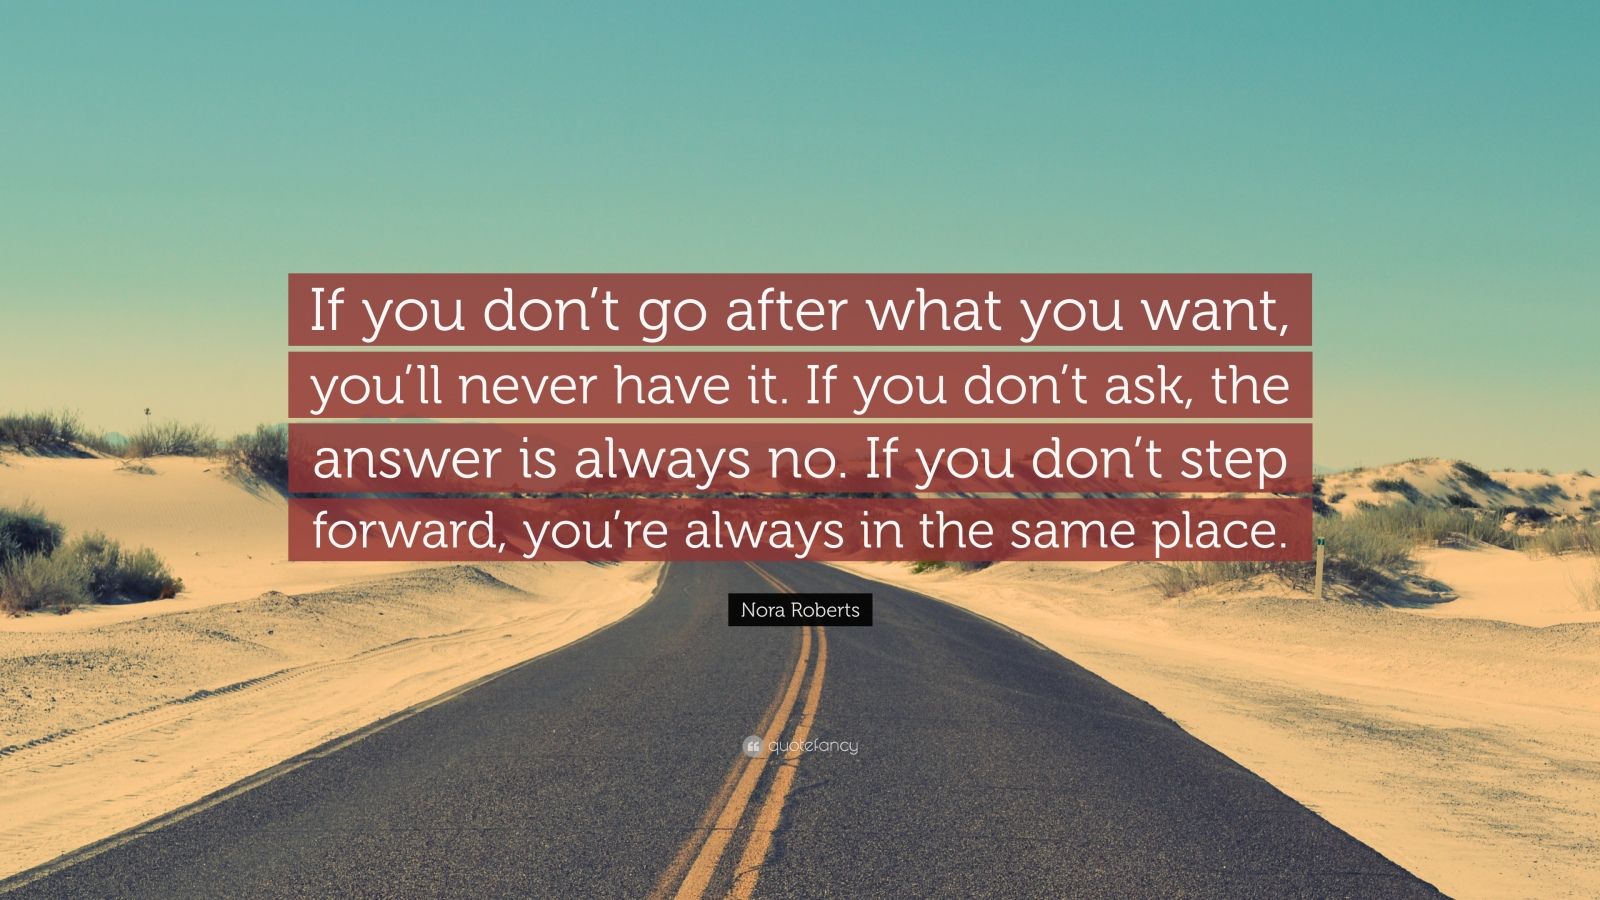 Nora Roberts Quote: “If you don’t go after what you want, you’ll never ...